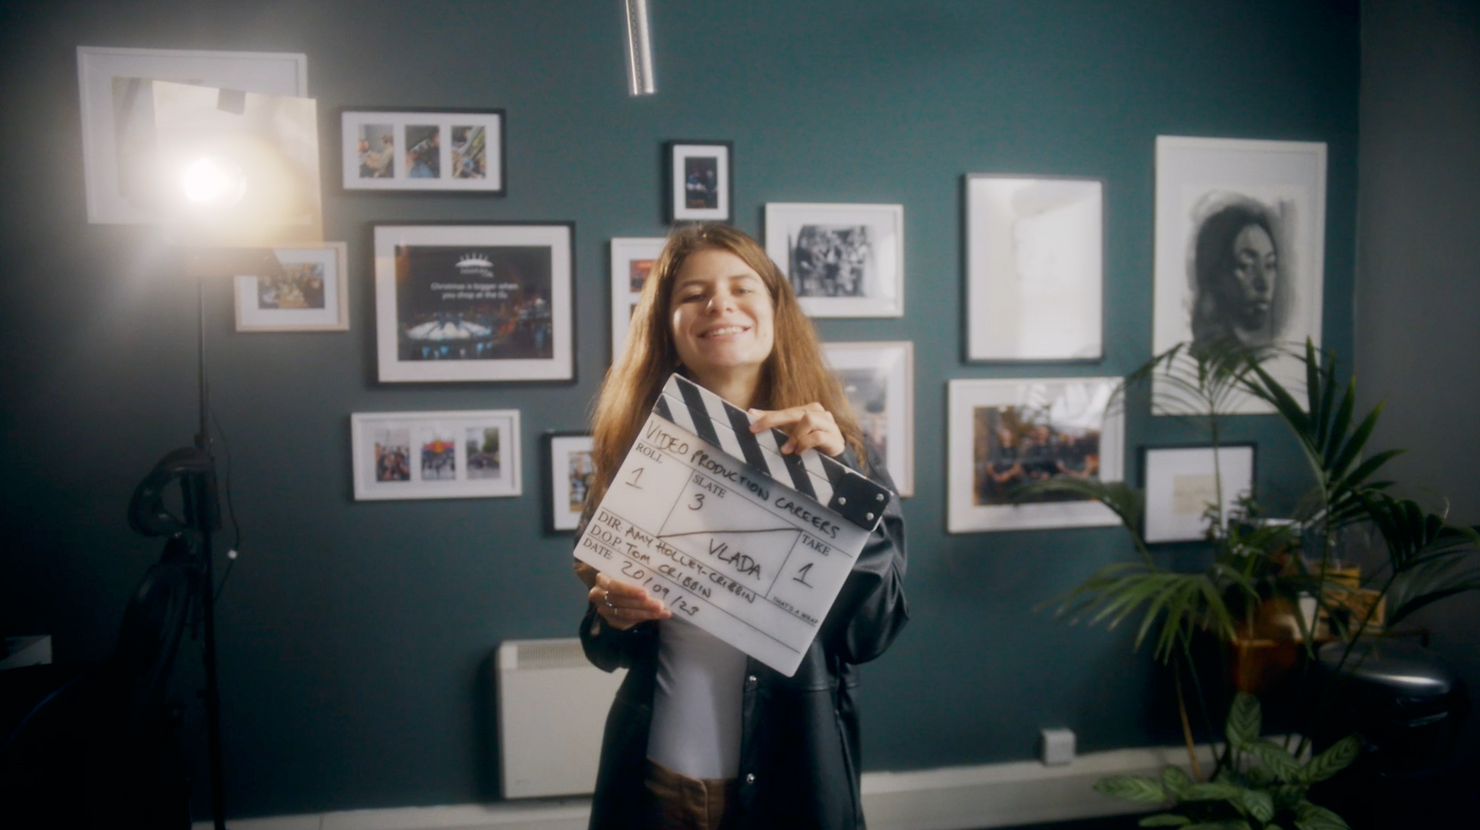 Nomadic UK staff member holding a clapper board on a shoot in their office